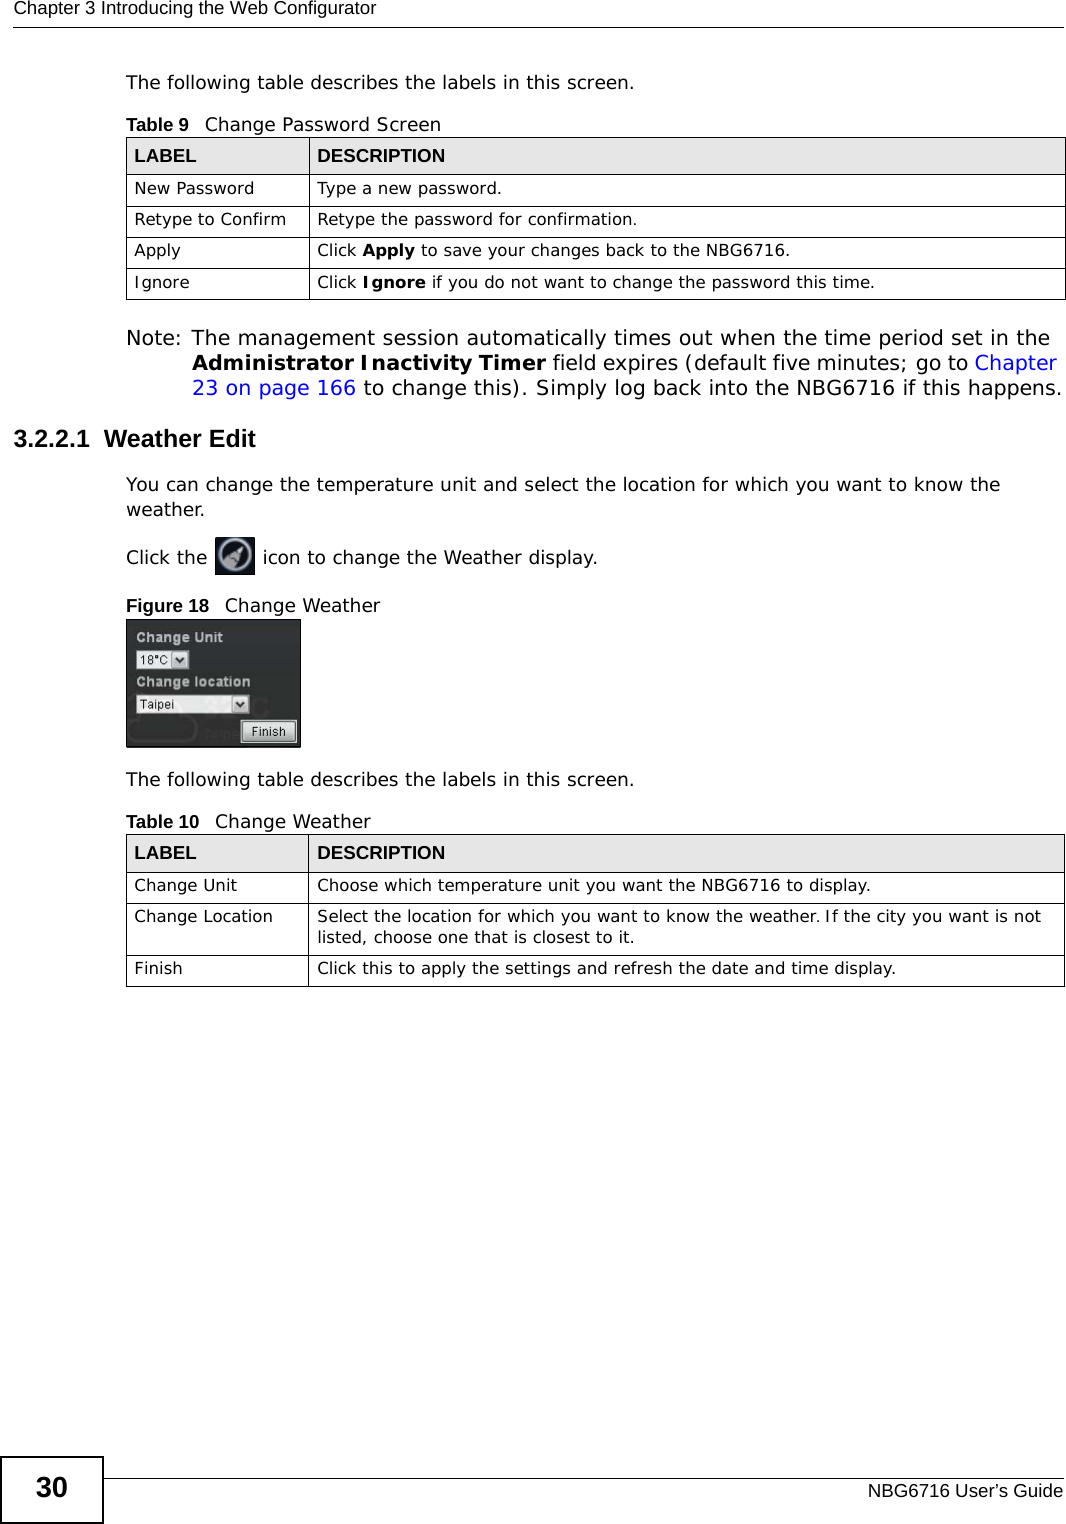 Chapter 3 Introducing the Web ConfiguratorNBG6716 User’s Guide30The following table describes the labels in this screen.Note: The management session automatically times out when the time period set in the Administrator Inactivity Timer field expires (default five minutes; go to Chapter 23 on page 166 to change this). Simply log back into the NBG6716 if this happens.3.2.2.1  Weather EditYou can change the temperature unit and select the location for which you want to know the weather.Click the   icon to change the Weather display.Figure 18   Change WeatherThe following table describes the labels in this screen.Table 9   Change Password ScreenLABEL DESCRIPTIONNew Password Type a new password. Retype to Confirm Retype the password for confirmation.Apply Click Apply to save your changes back to the NBG6716.Ignore Click Ignore if you do not want to change the password this time.Table 10   Change WeatherLABEL DESCRIPTIONChange Unit Choose which temperature unit you want the NBG6716 to display. Change Location Select the location for which you want to know the weather. If the city you want is not listed, choose one that is closest to it.Finish Click this to apply the settings and refresh the date and time display.